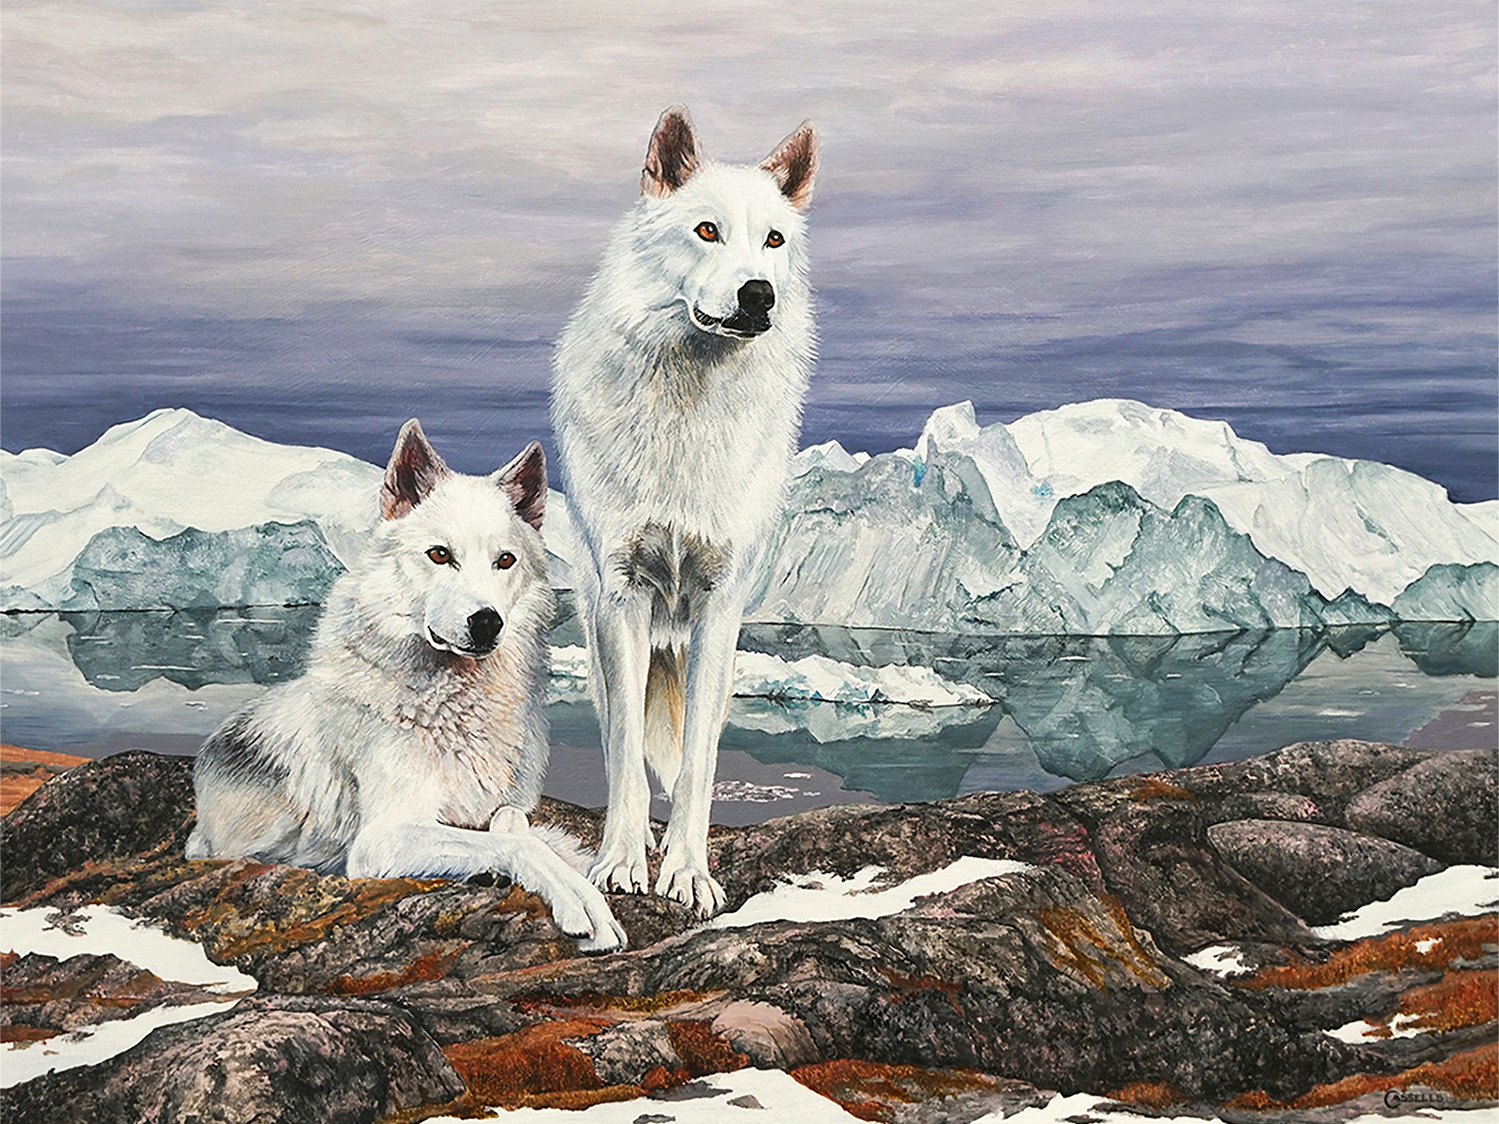 Laara cassells   on the lookout   arctic wolves kxqo1u